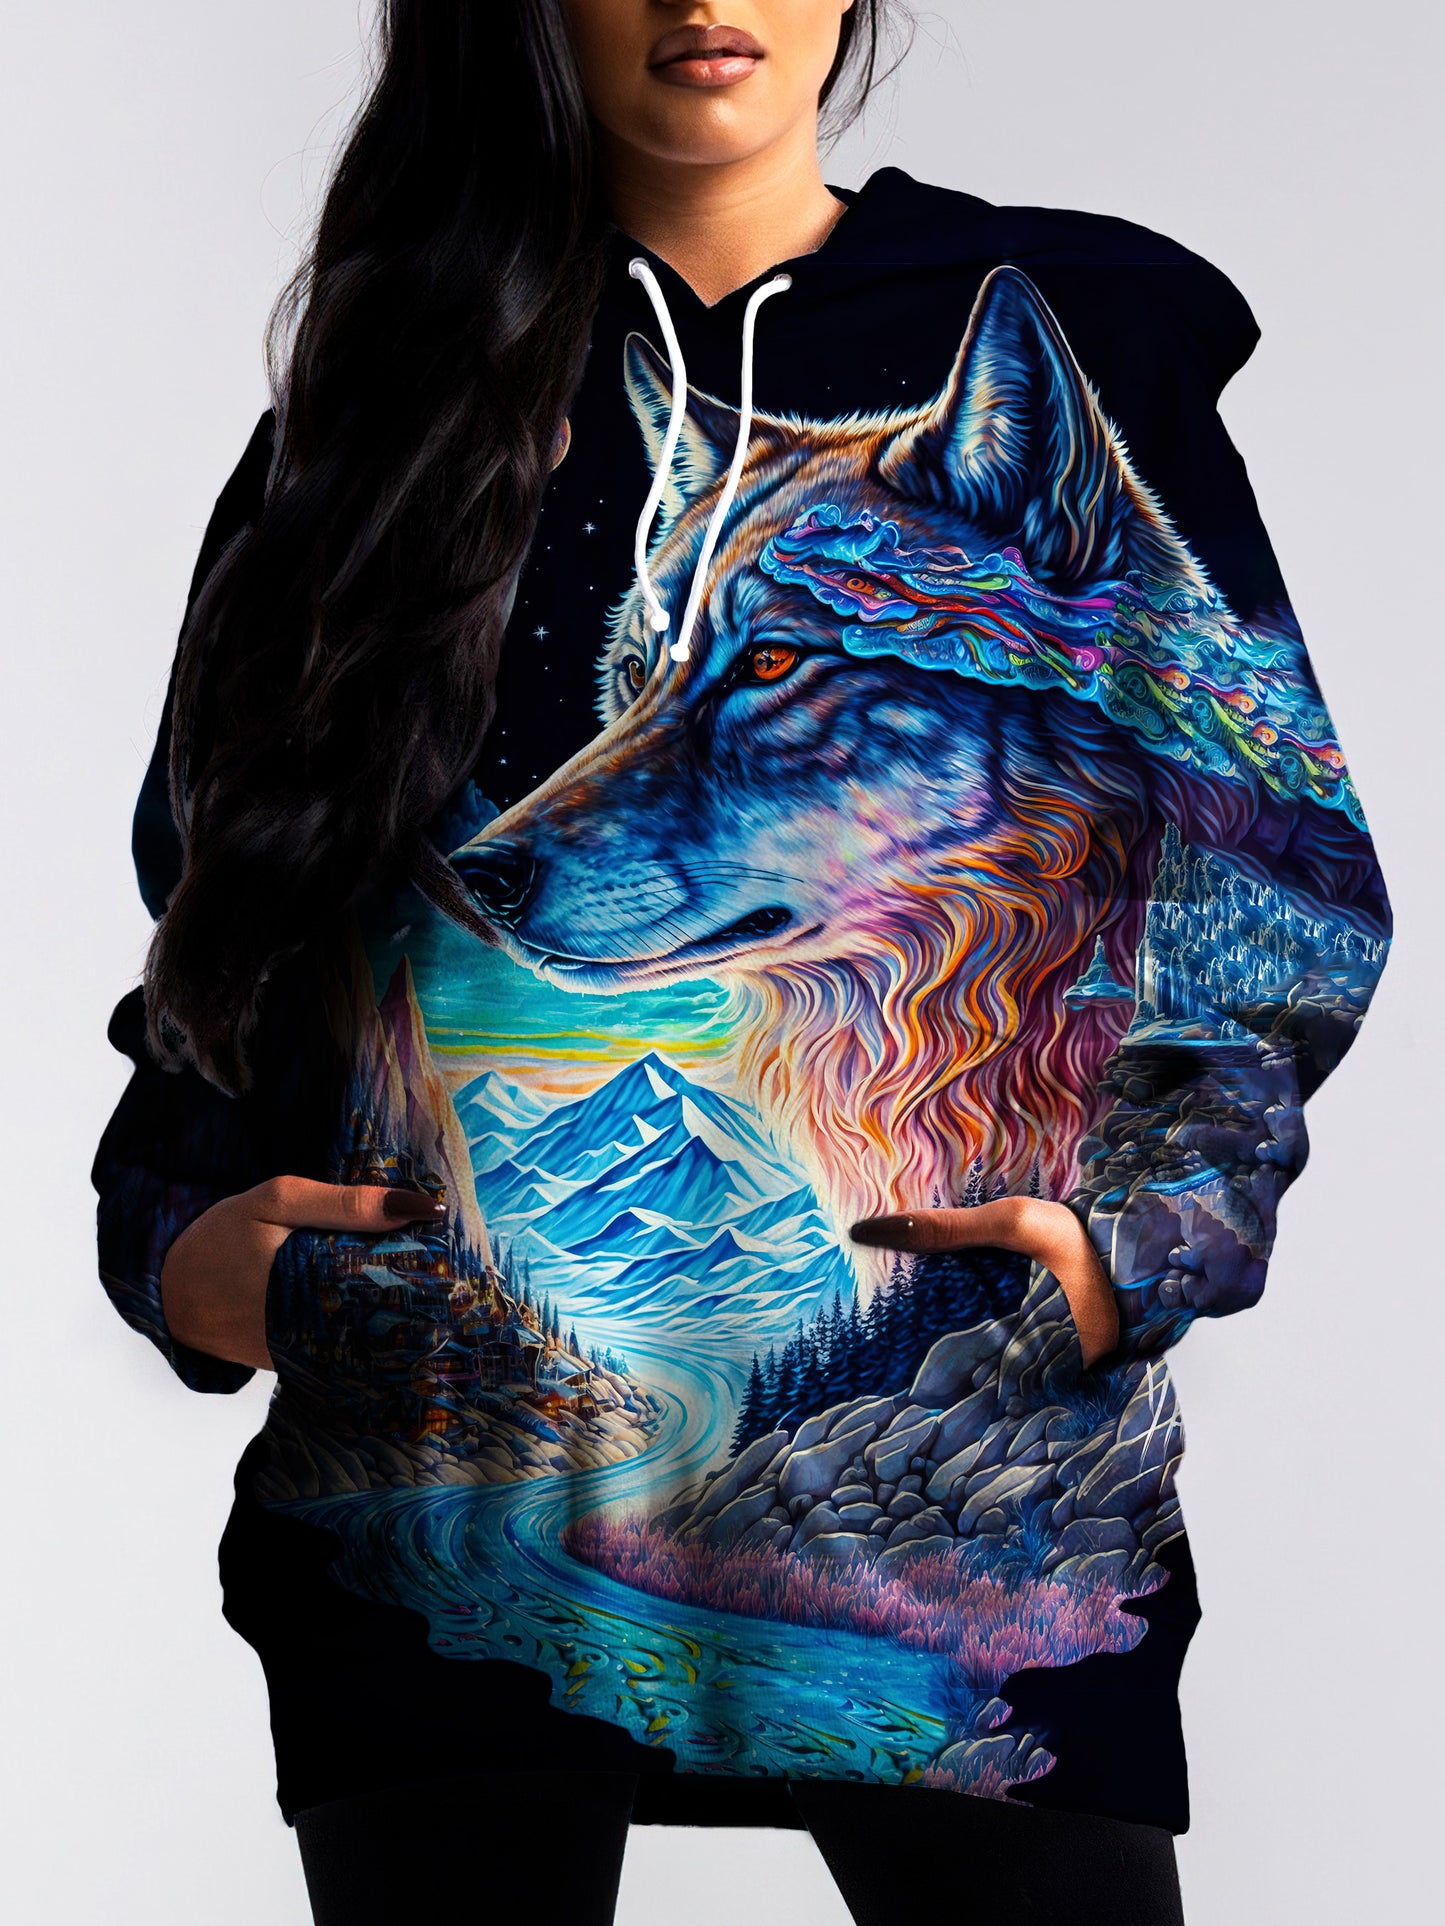 Stay warm and cozy at festivals and raves with this comfortable hoodie